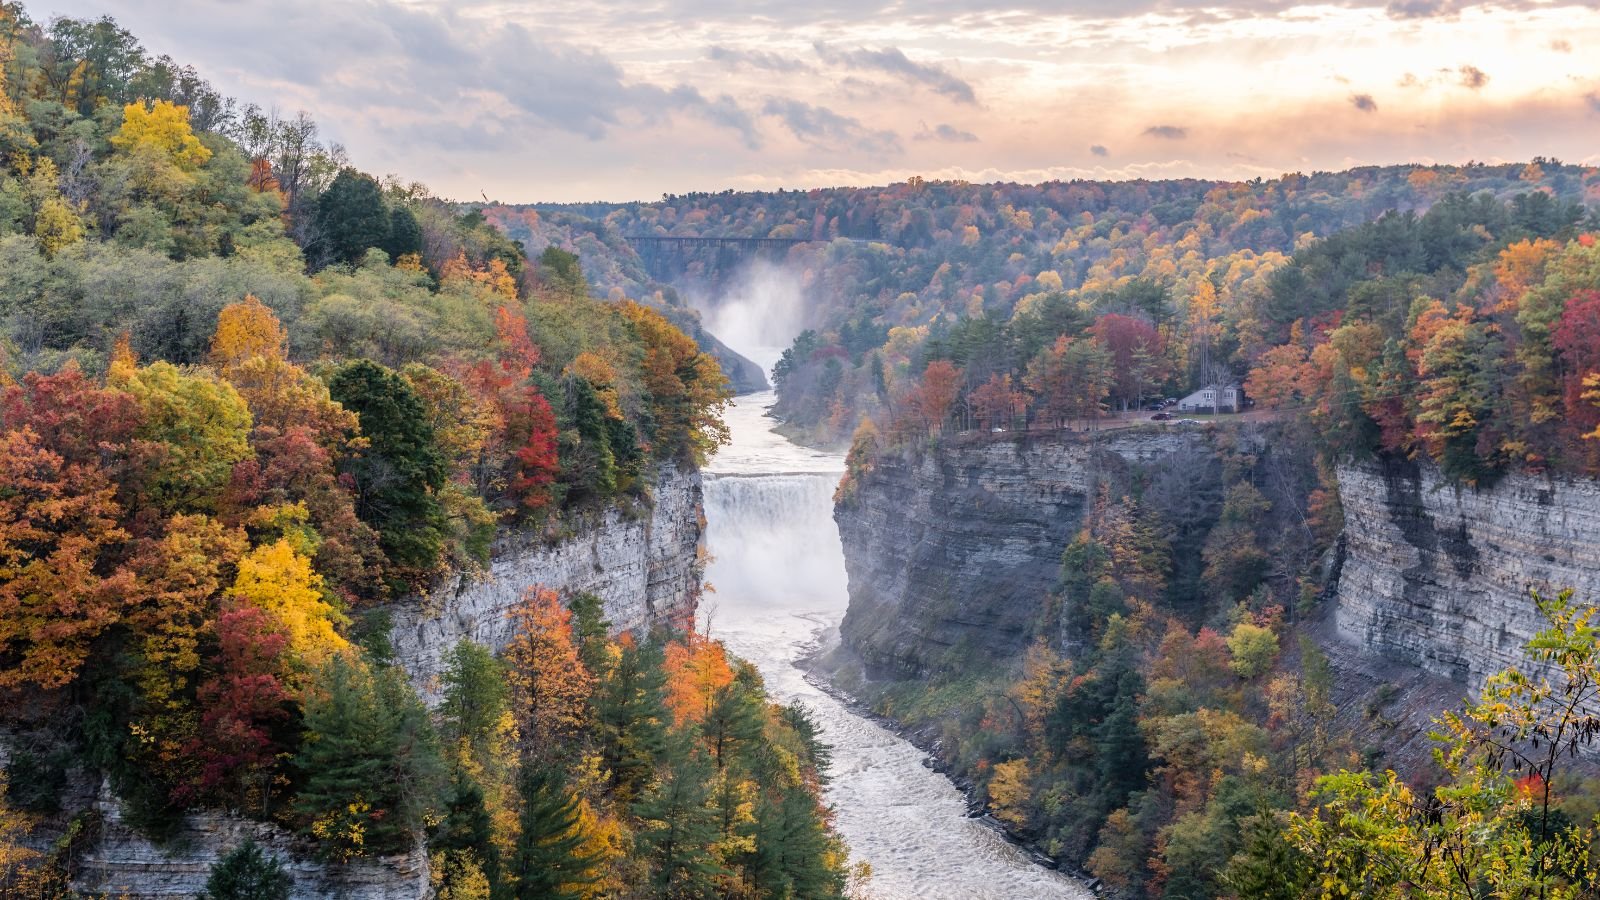 <p>In New York’s Greater Niagara area, Letchworth State Park is known as “the Grand Canyon of the East.” It offers beautiful views and activities such as hot-air balloon rides and 66 miles of hiking trails. Visit during peak leaf-peeping season for the most beautiful experience among the changing autumn colors.</p>